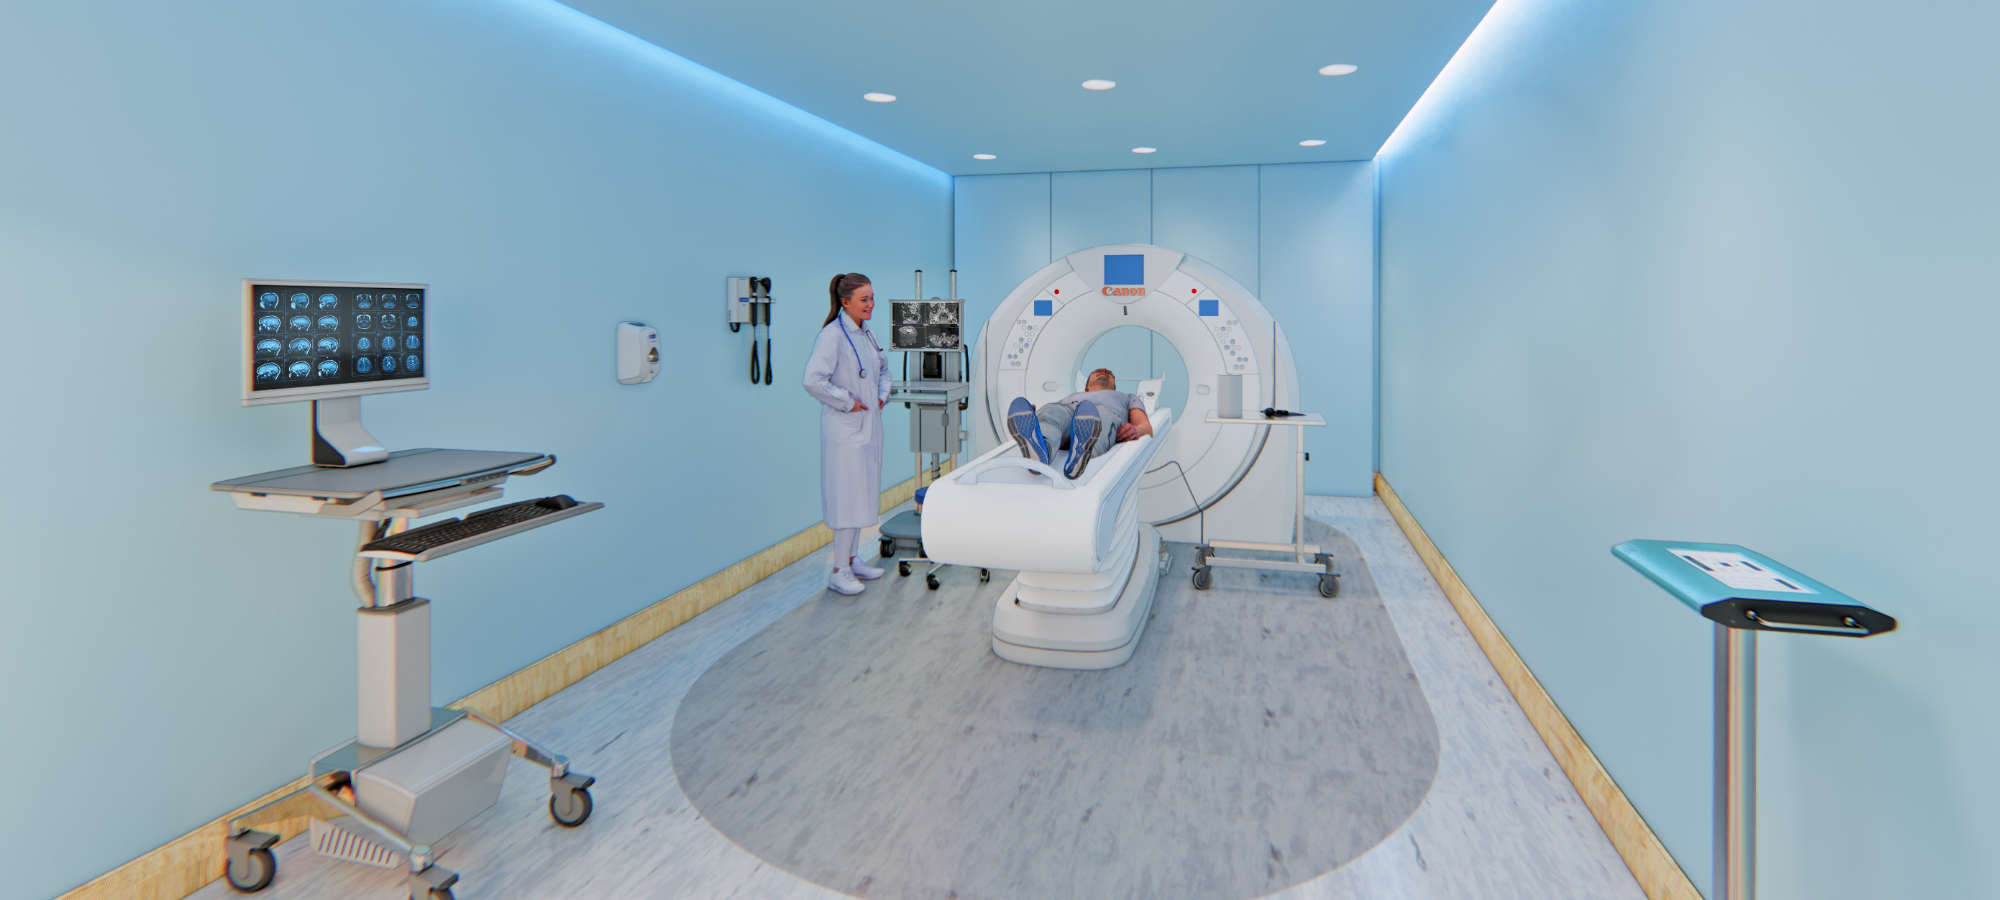 Imaging Matters Turnkey option to deliver Community Diagnostic Hubs (CDHs)